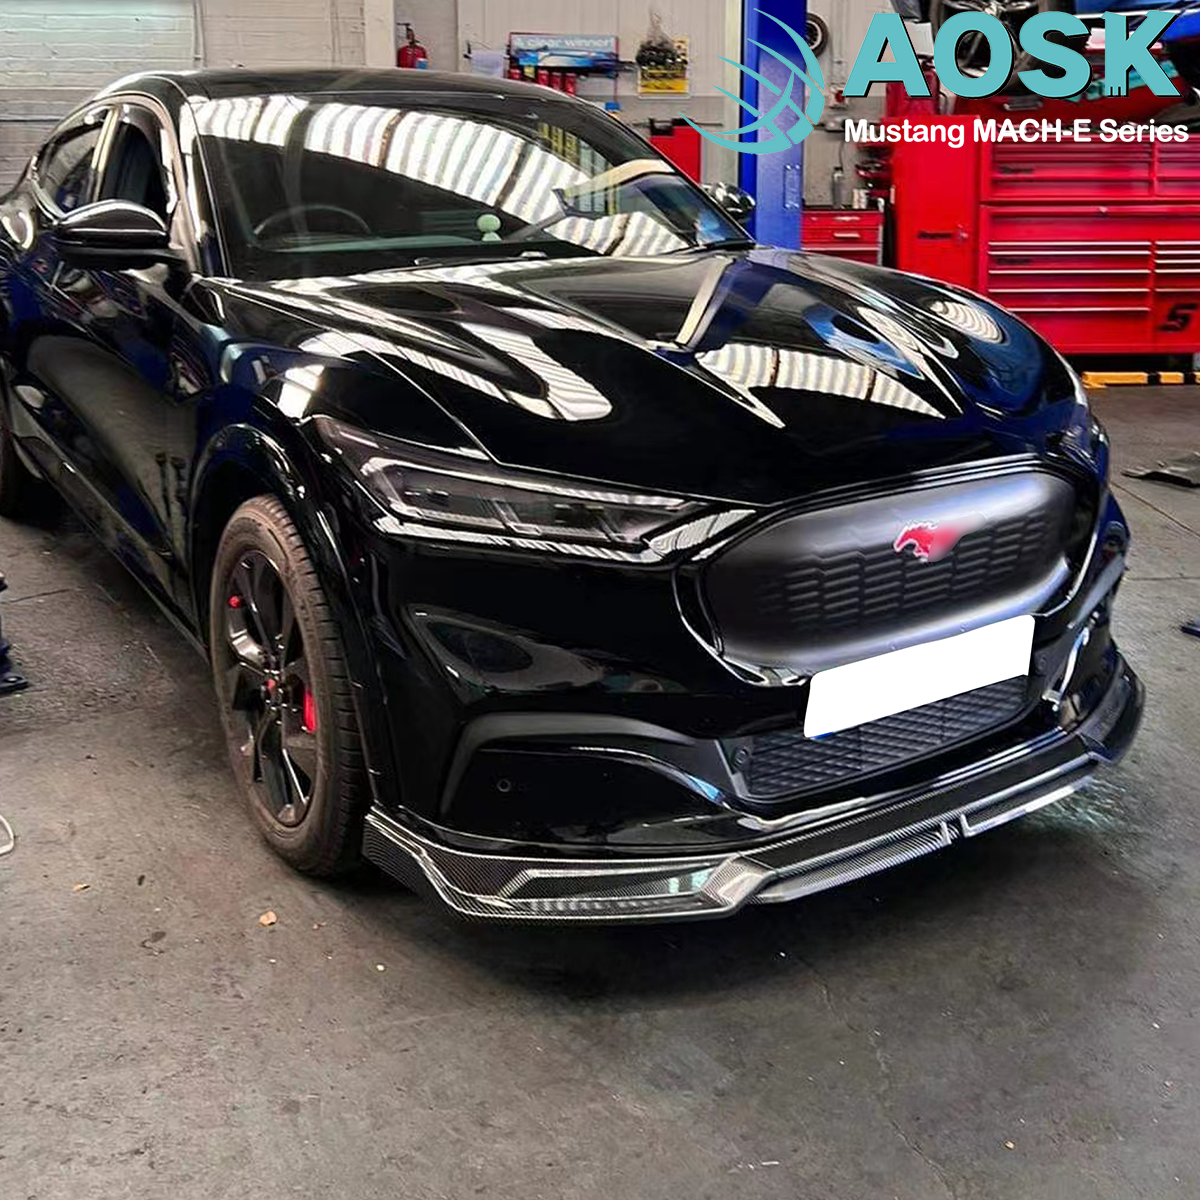 Mach E Front Lip from AOSK